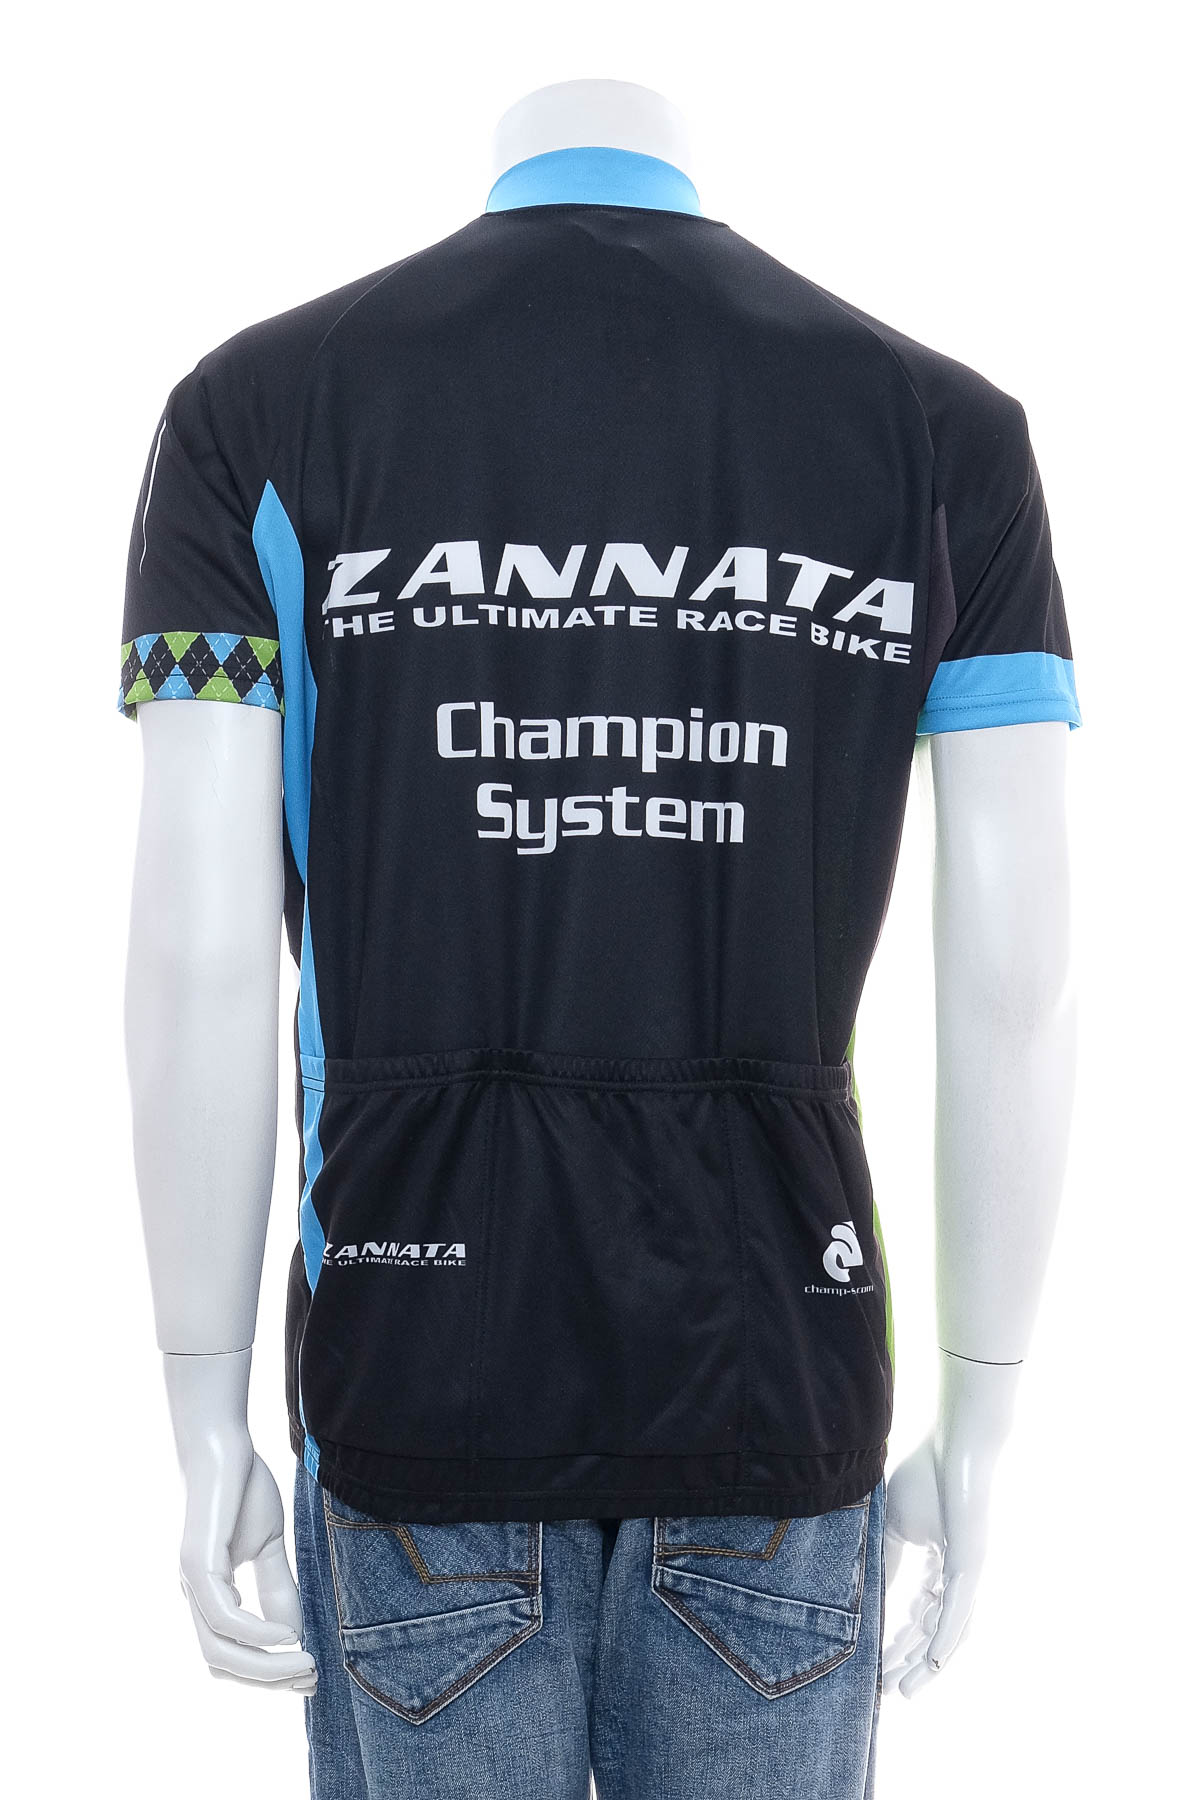 Male sports top for cycling - Champion System - 1